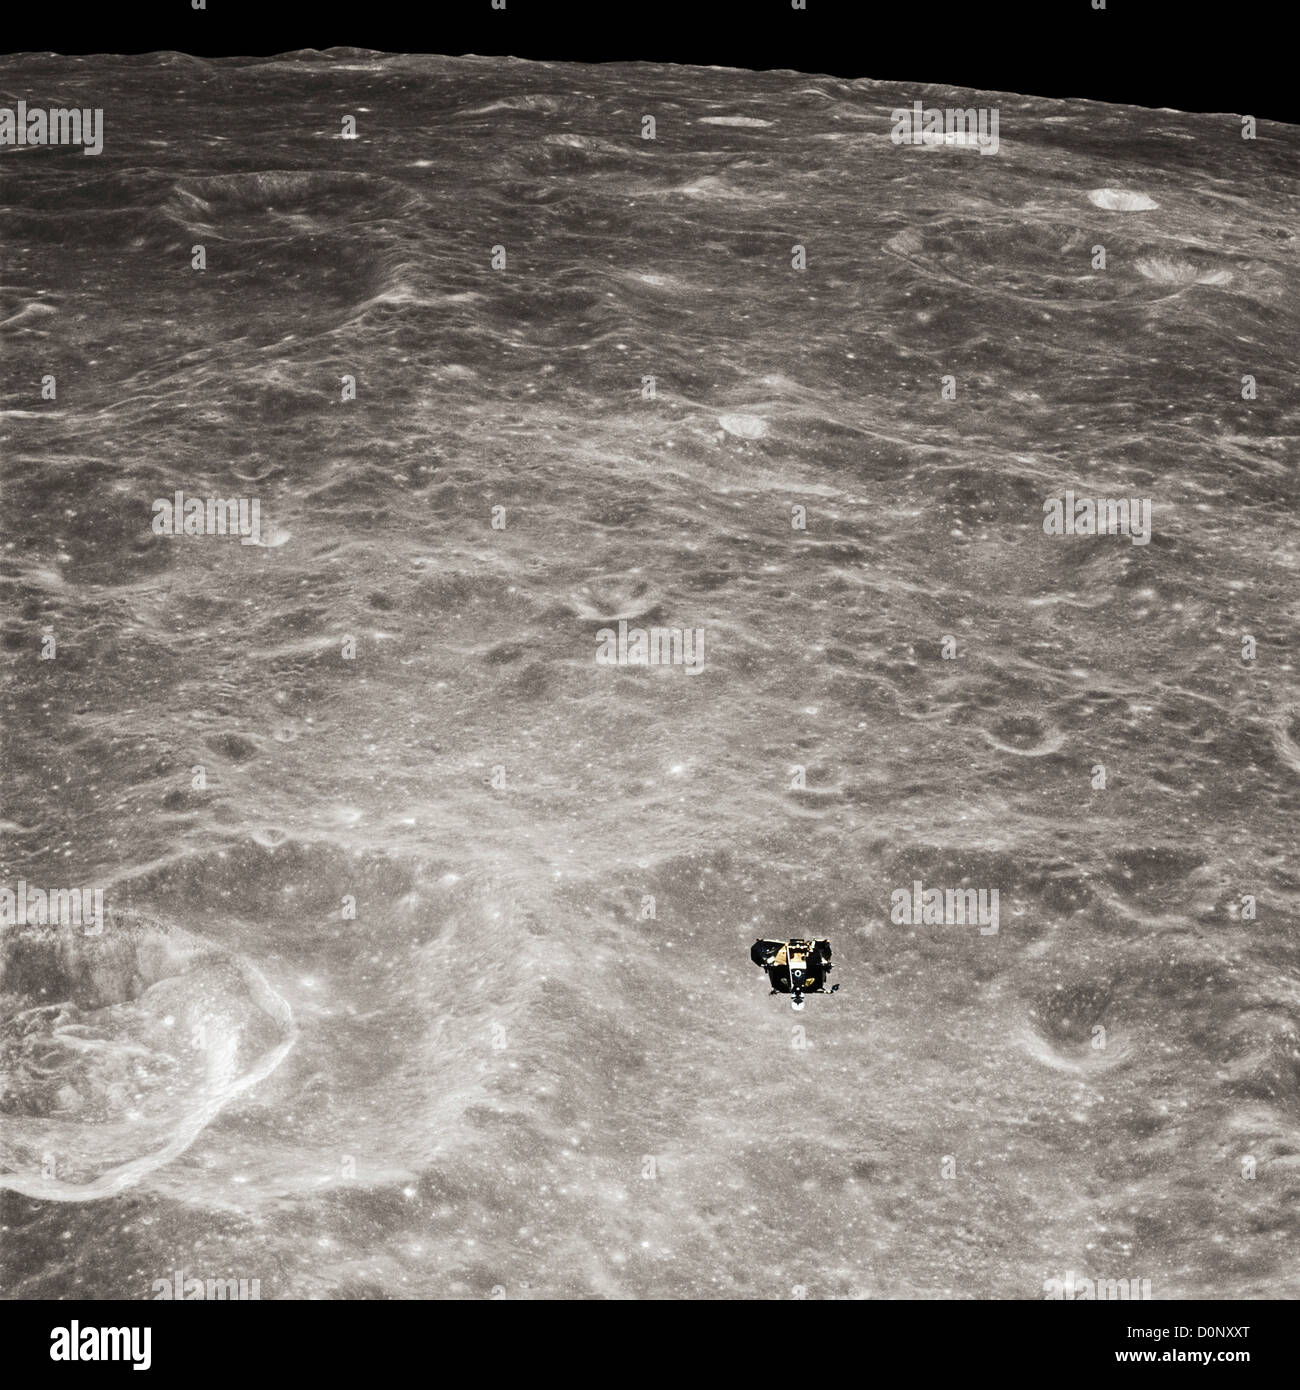 Apollo 11 - The Lunar Lander Eagle Ascends From the Moon's Surface Stock Photo